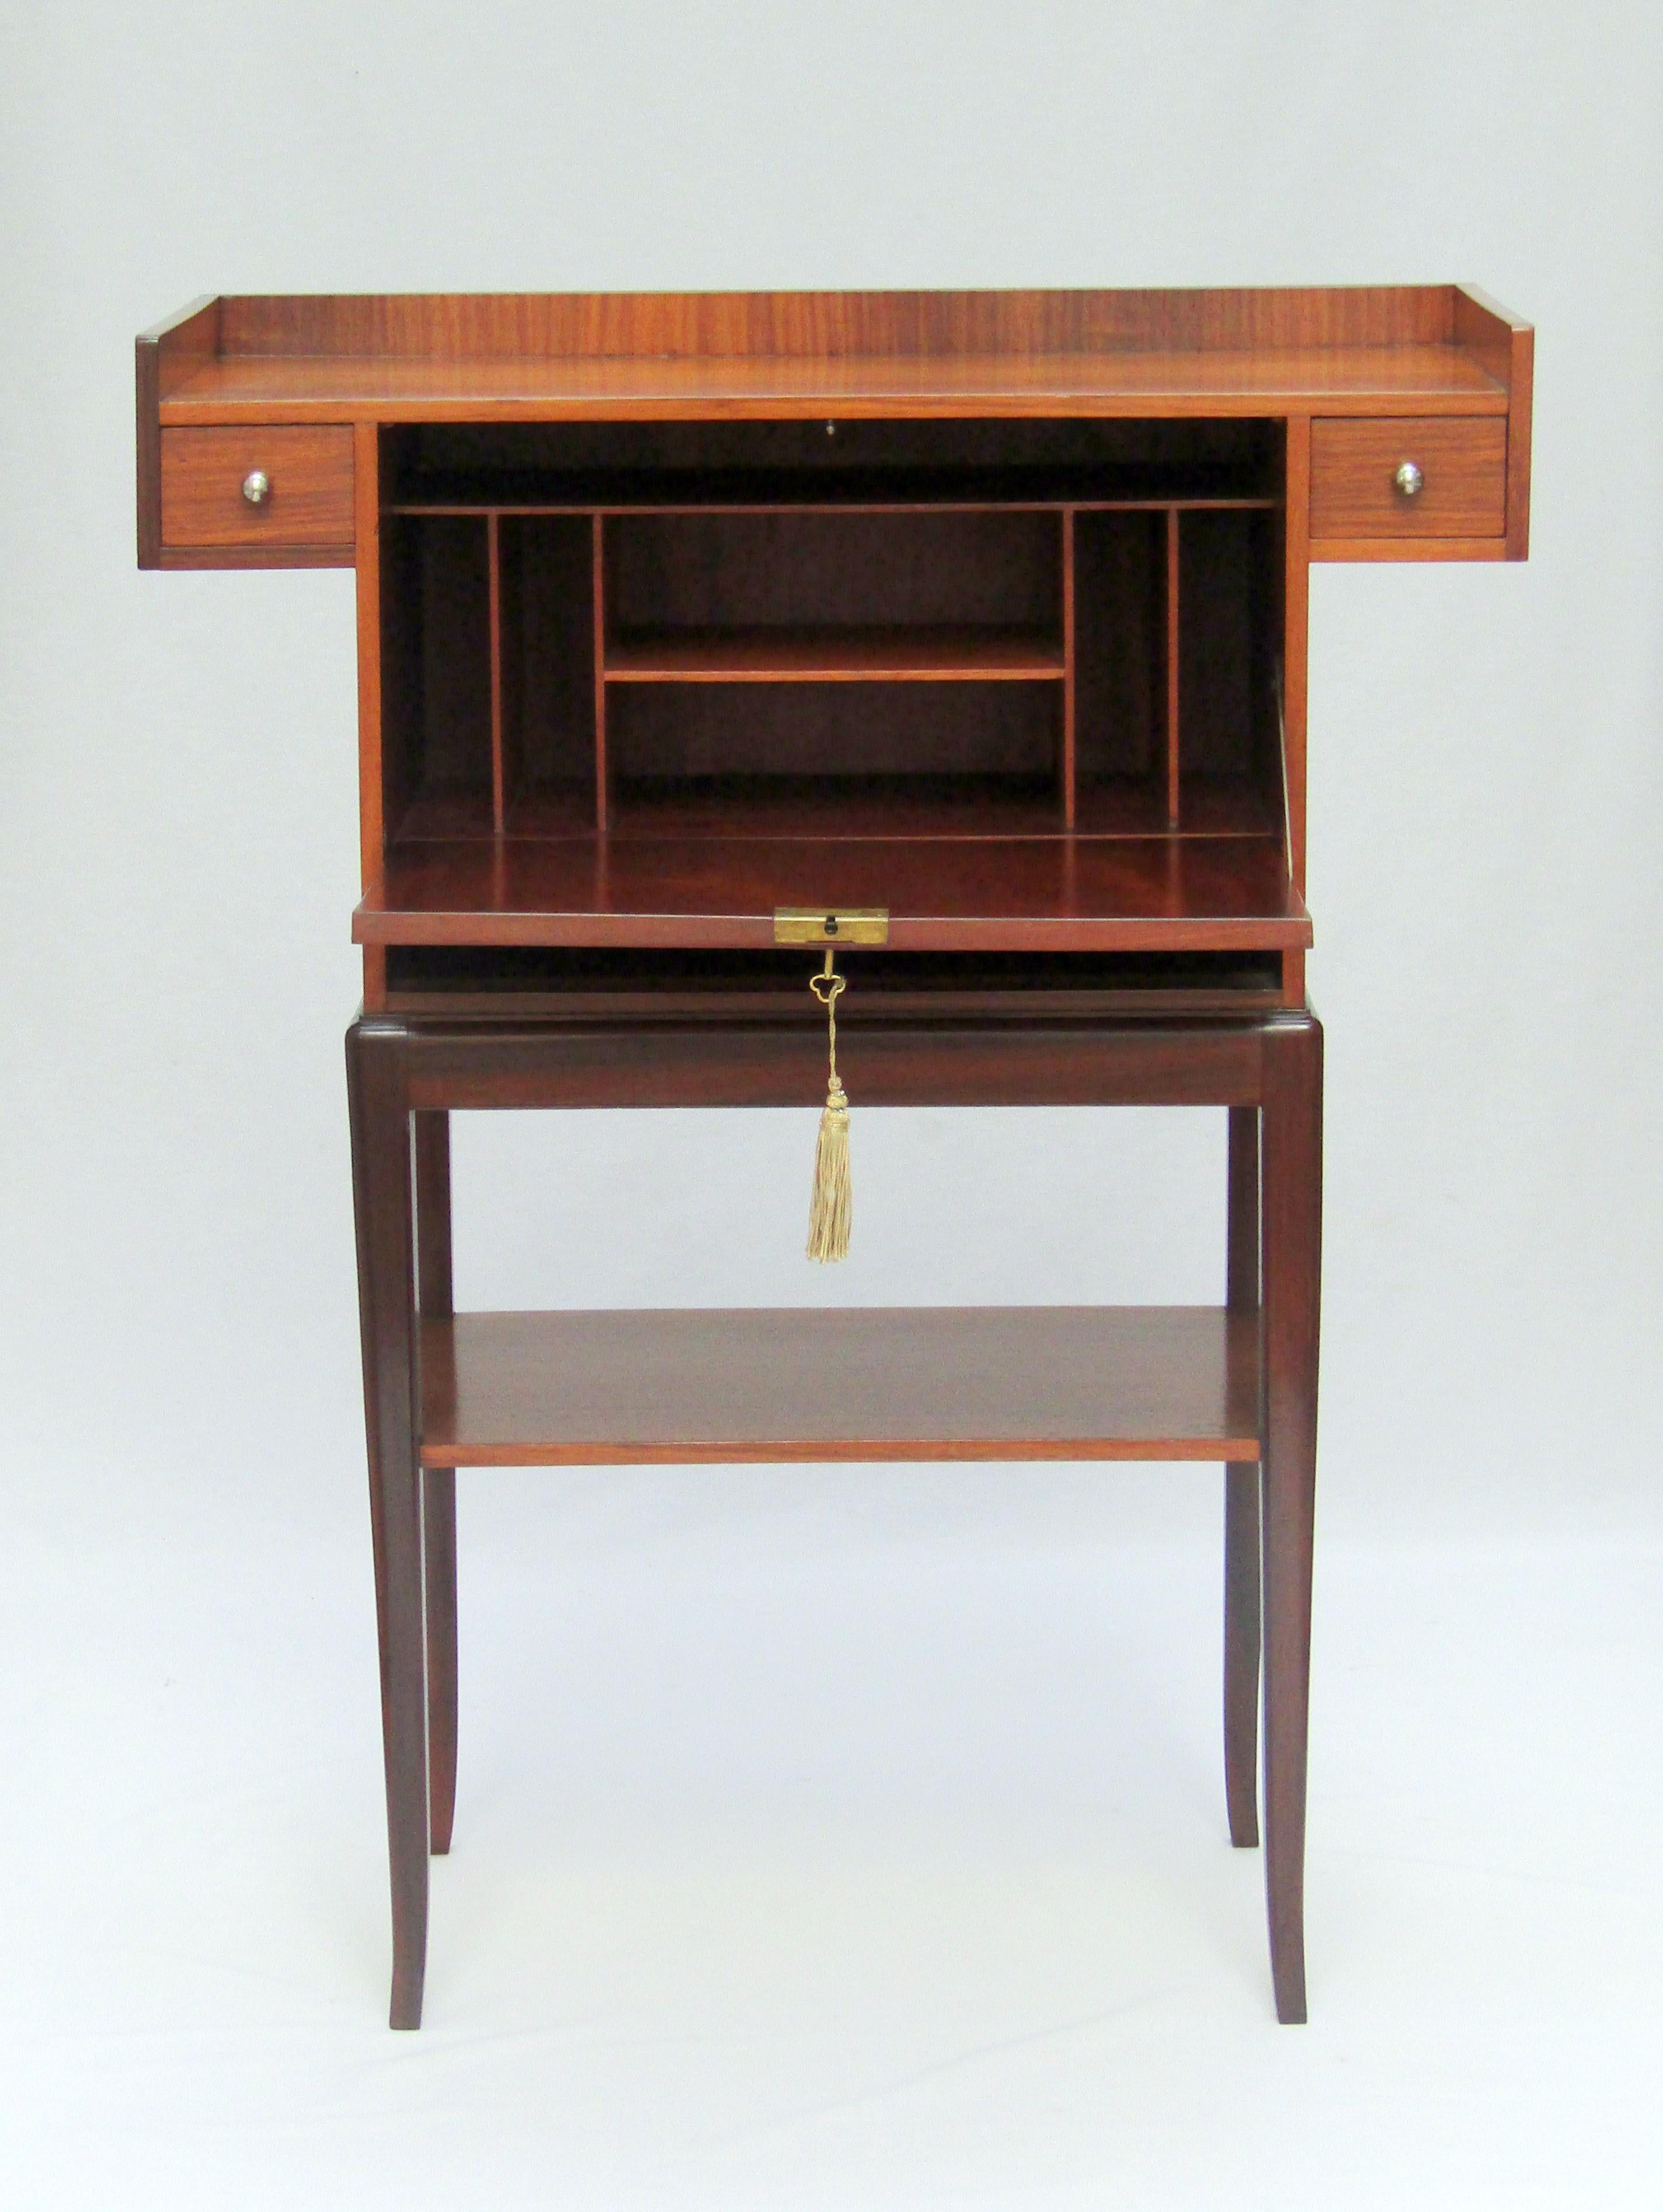 An Art Nouveau mahogany drop front
writing desk with mother of pearl
inlay by Louis Majorelle (1859-1926)
Stamped Majorelle Nancy
French, circa 1925.